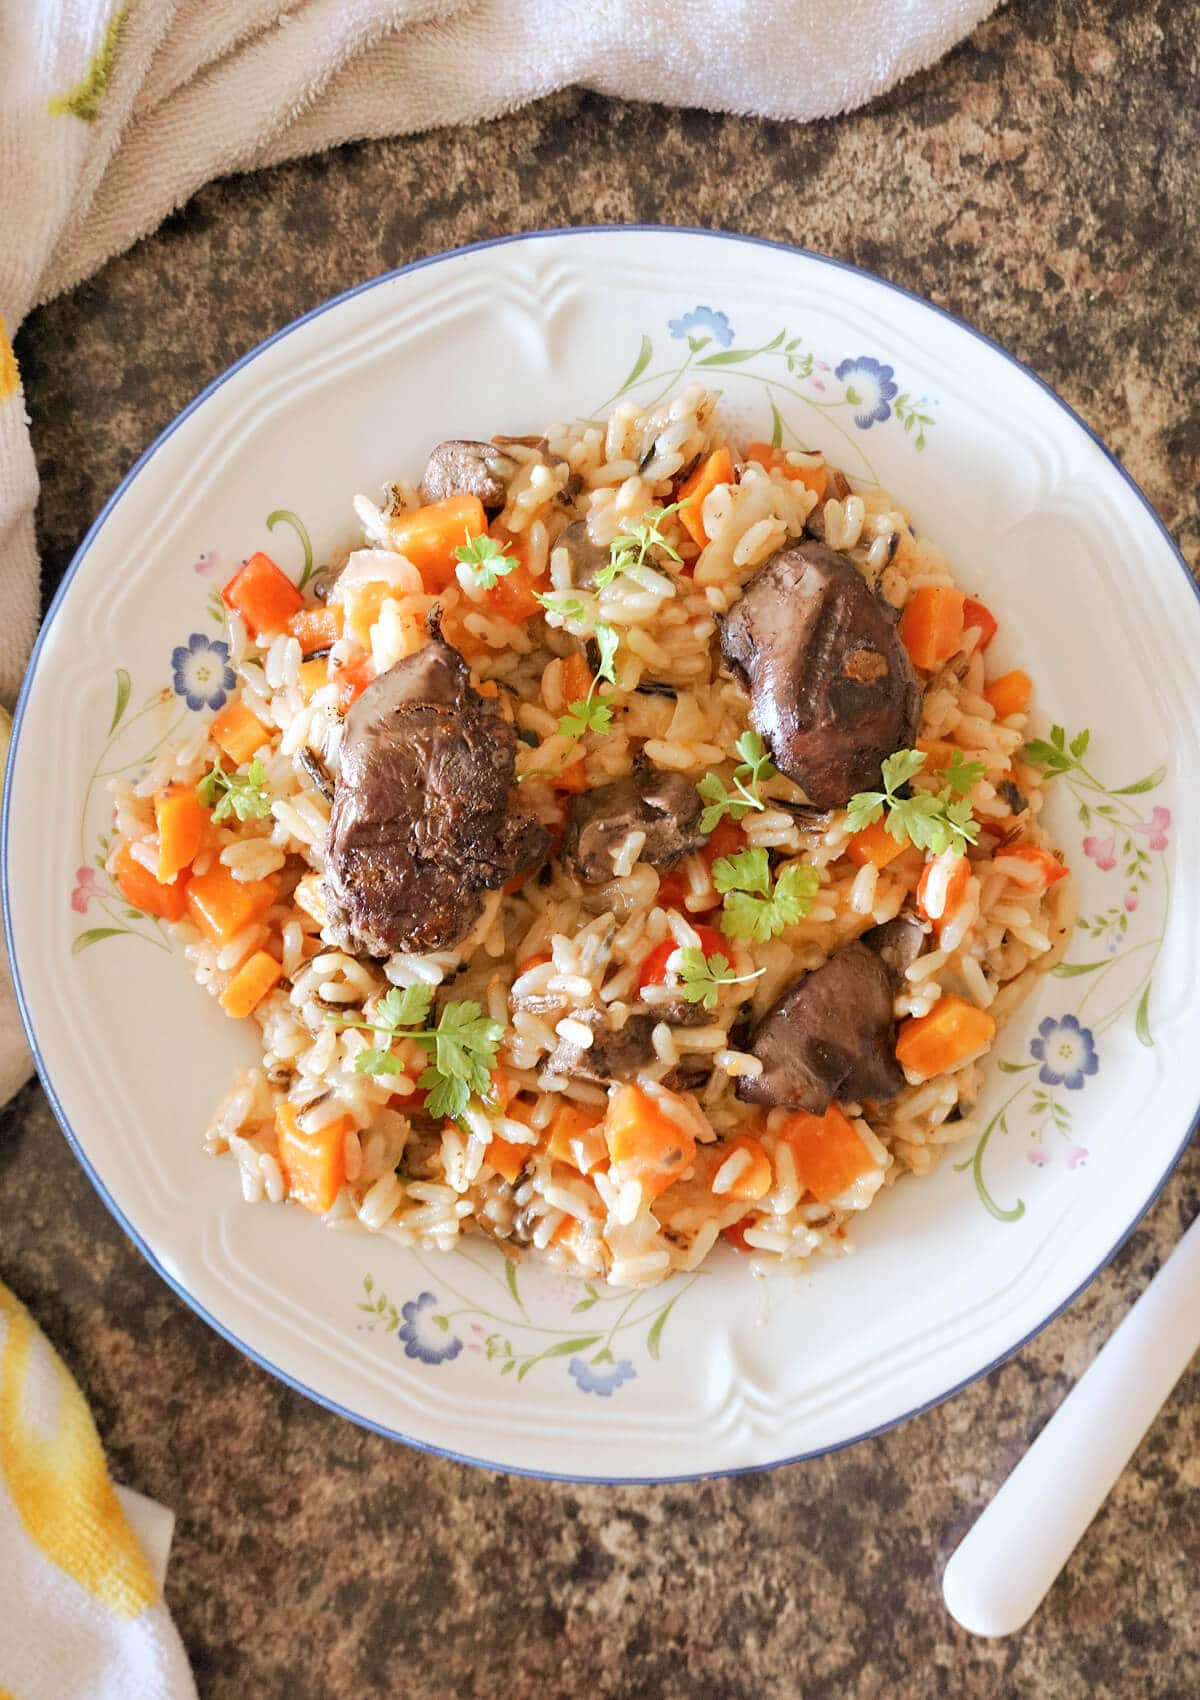 Overhead shot of a white plate with pilaf with vegetables and chicken liver